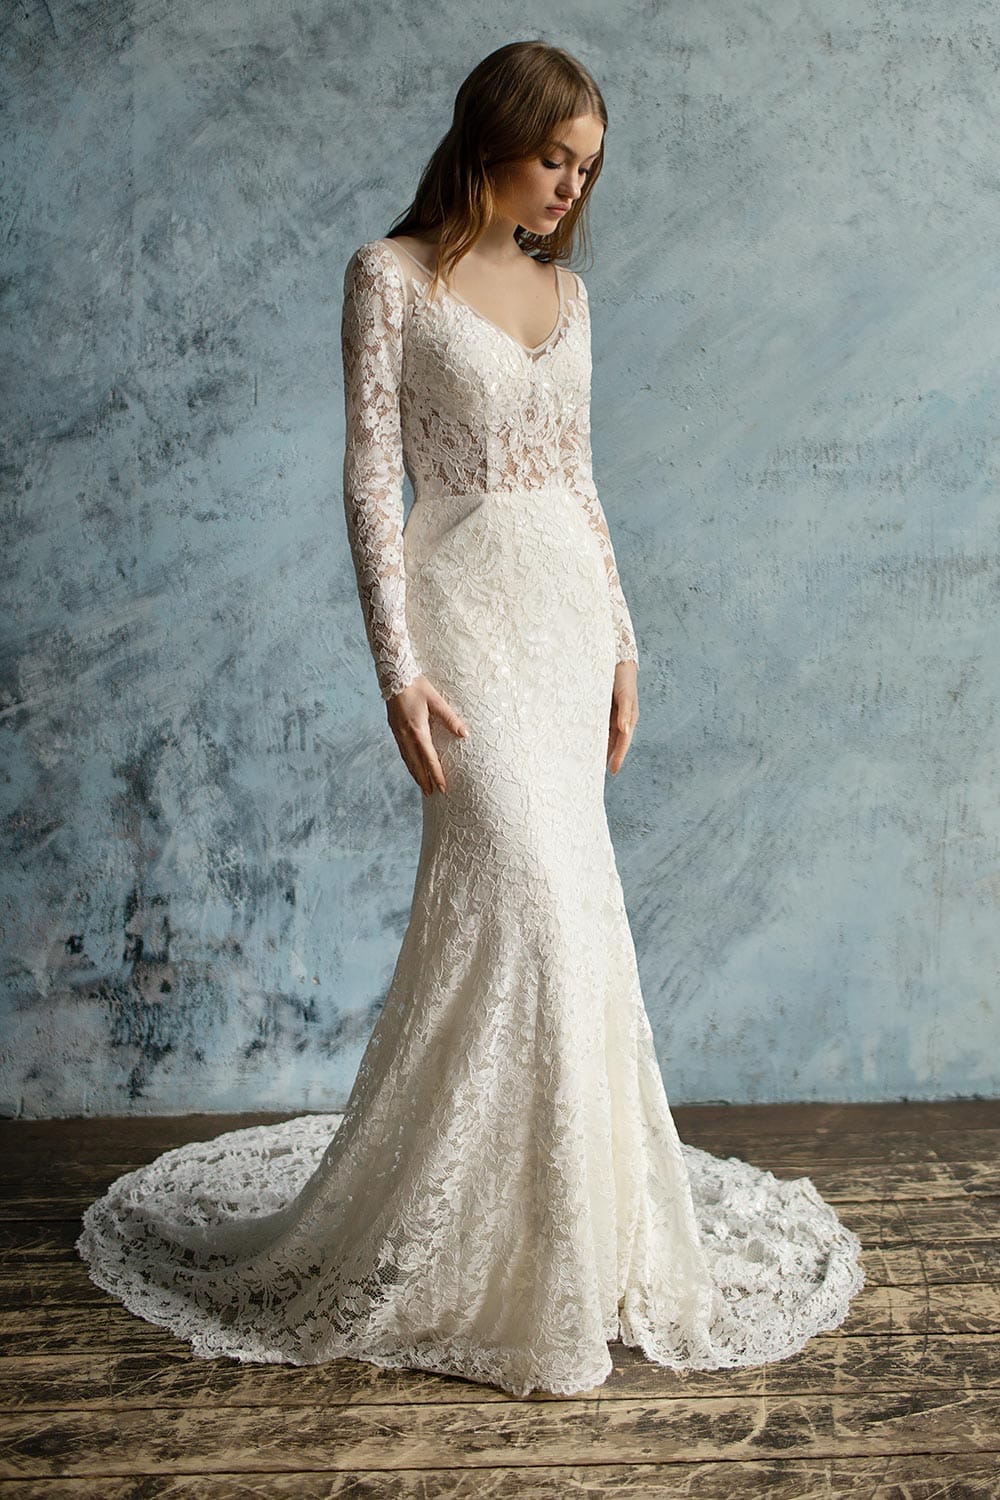 Wedding Gown With Sleeves Designs Top Sellers | bellvalefarms.com